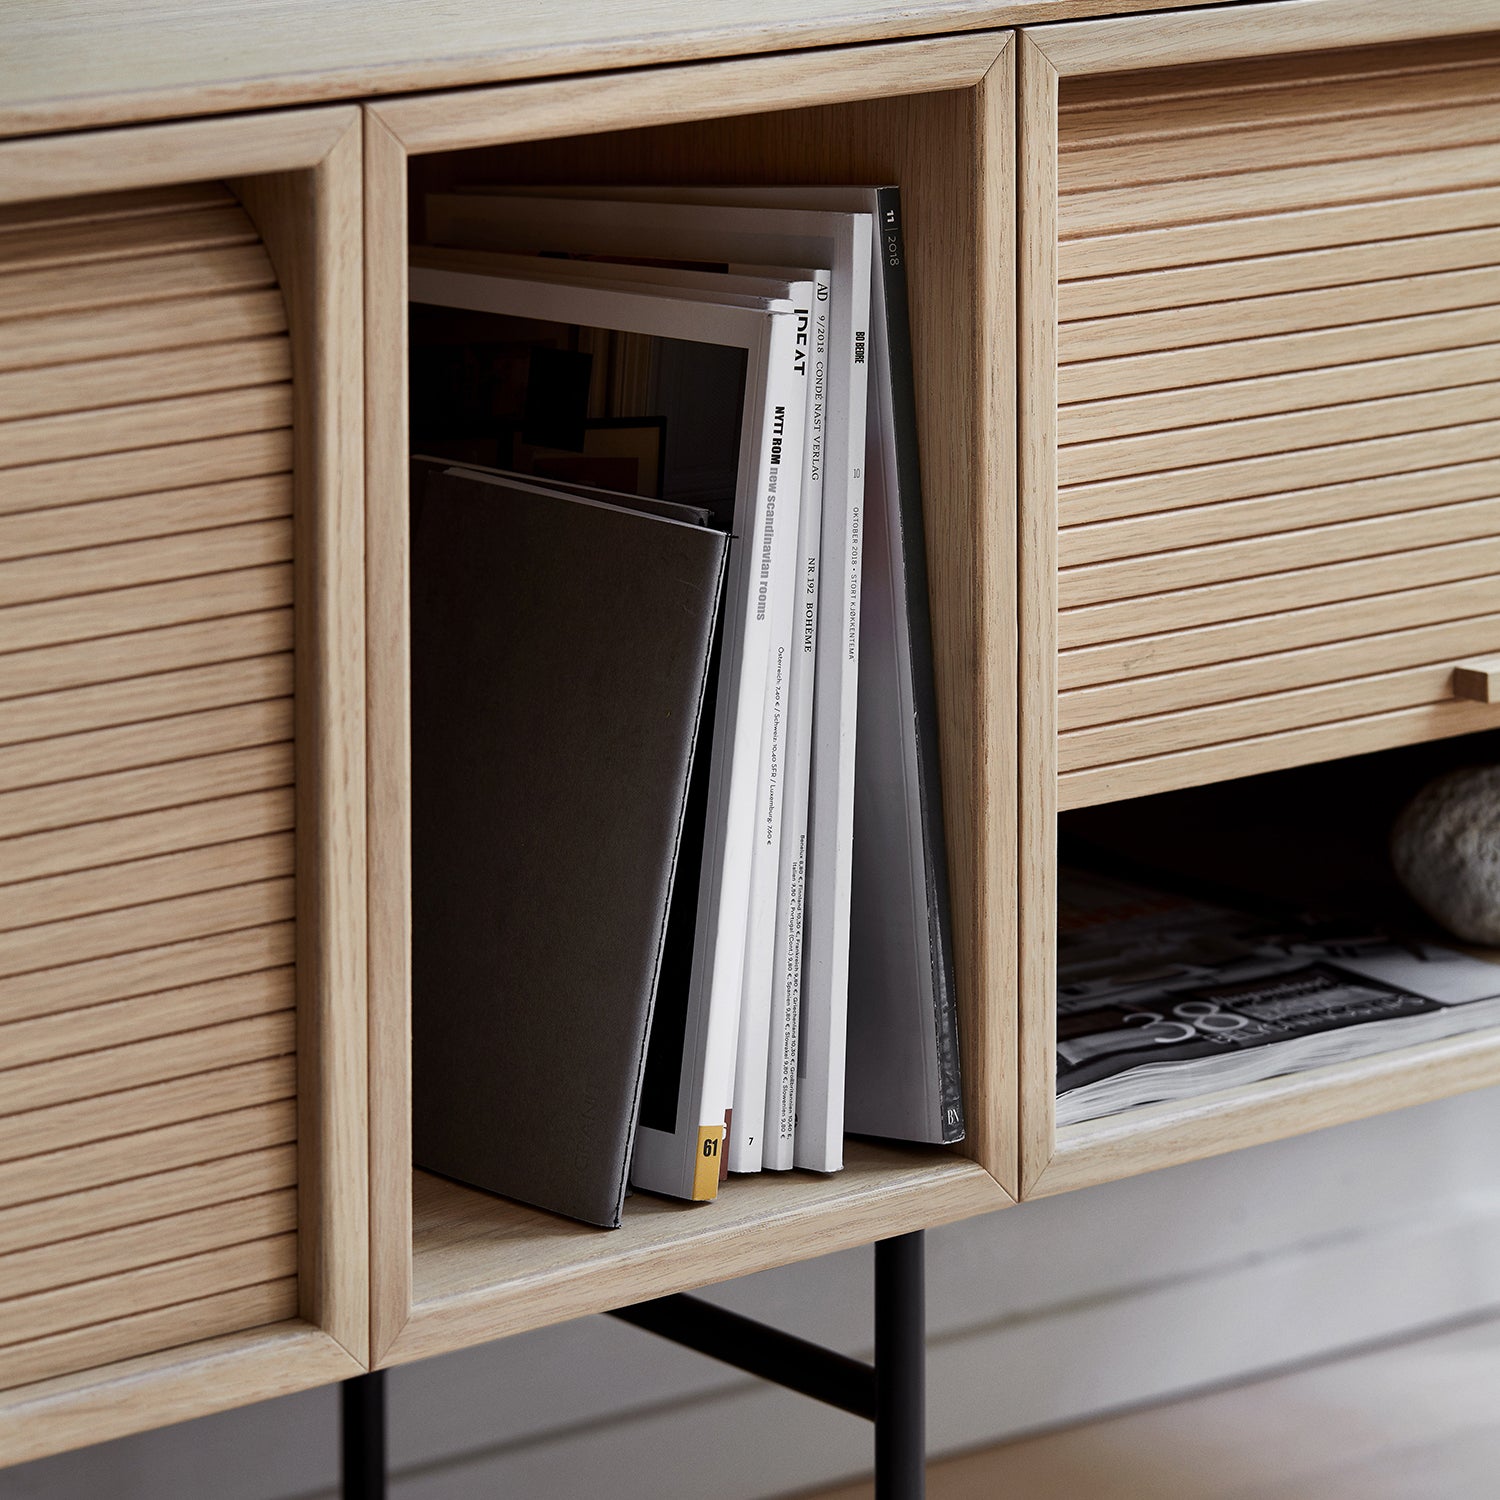 Hifive Storage System - The Design Choice